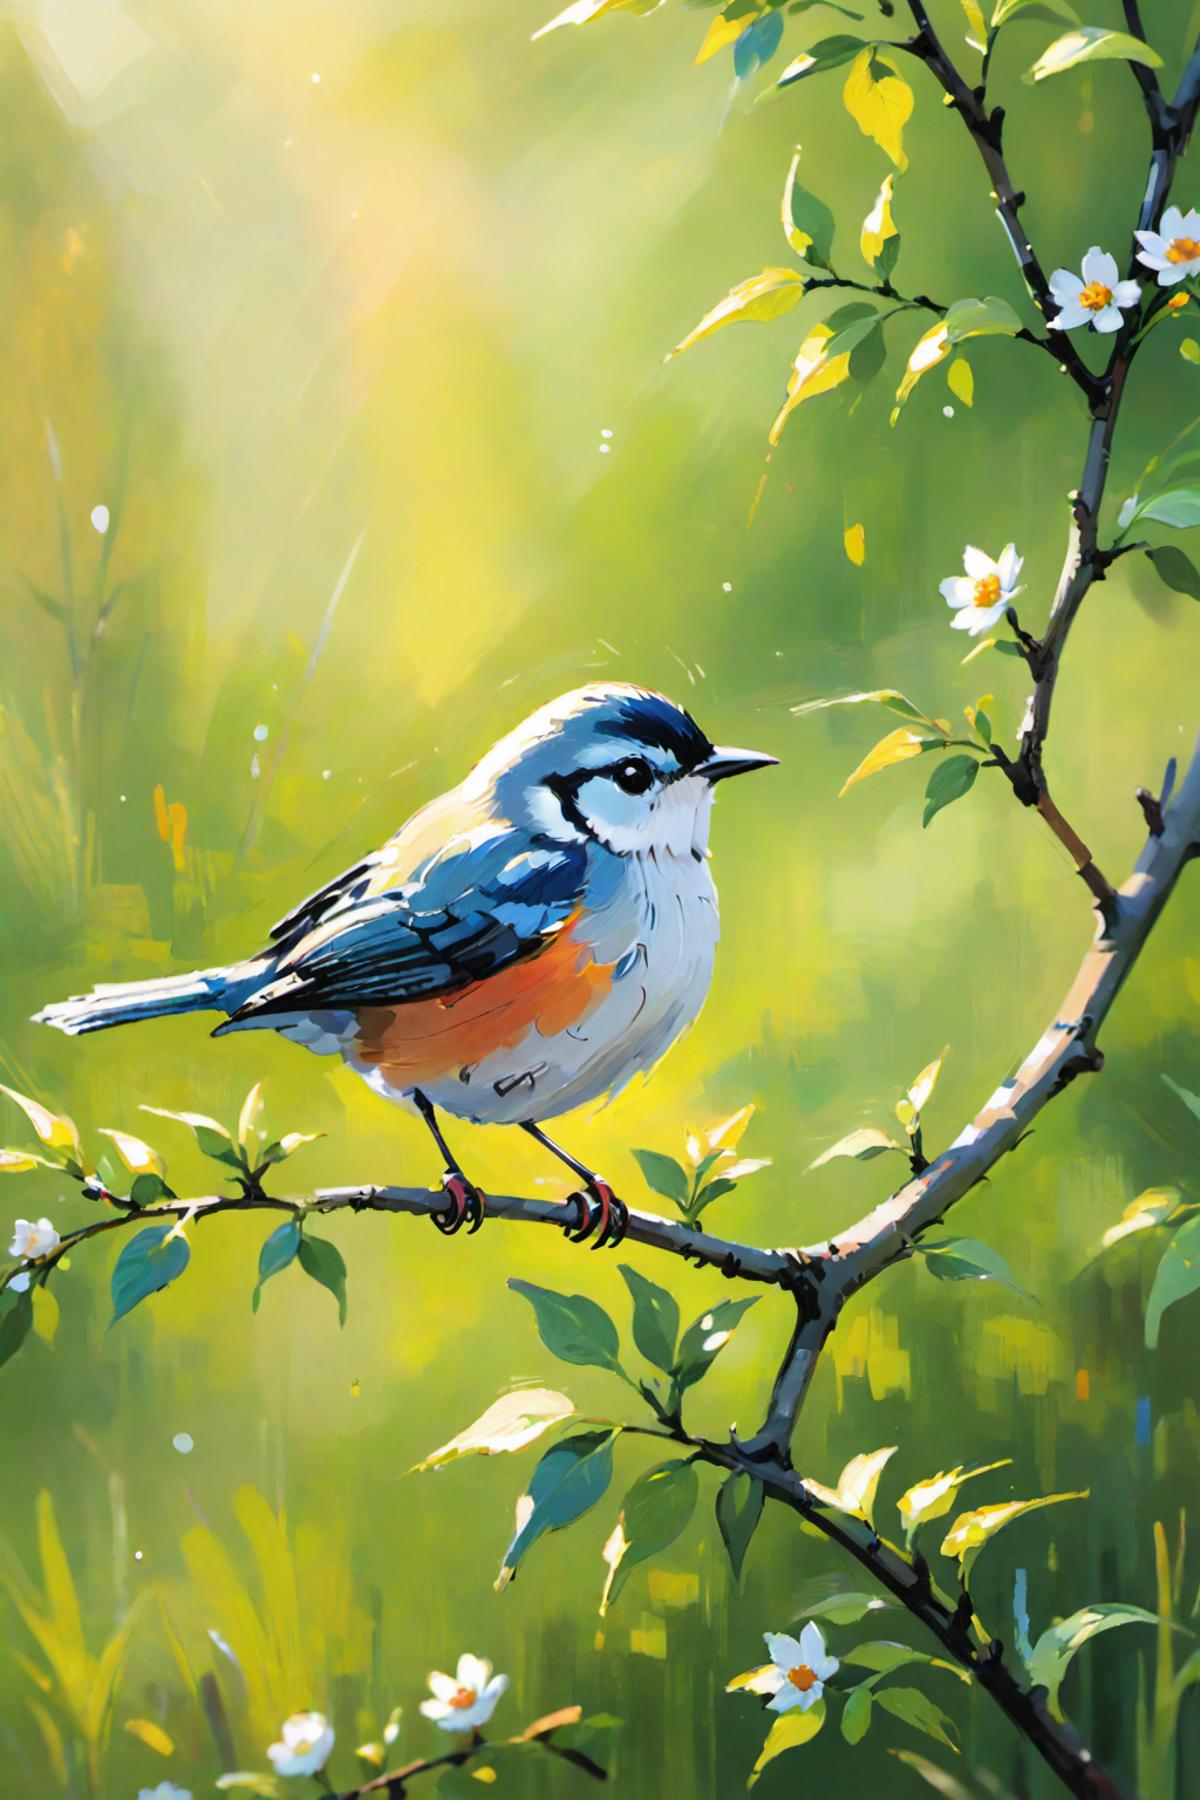 A Blue and Orange Bird Perched on a Branch.